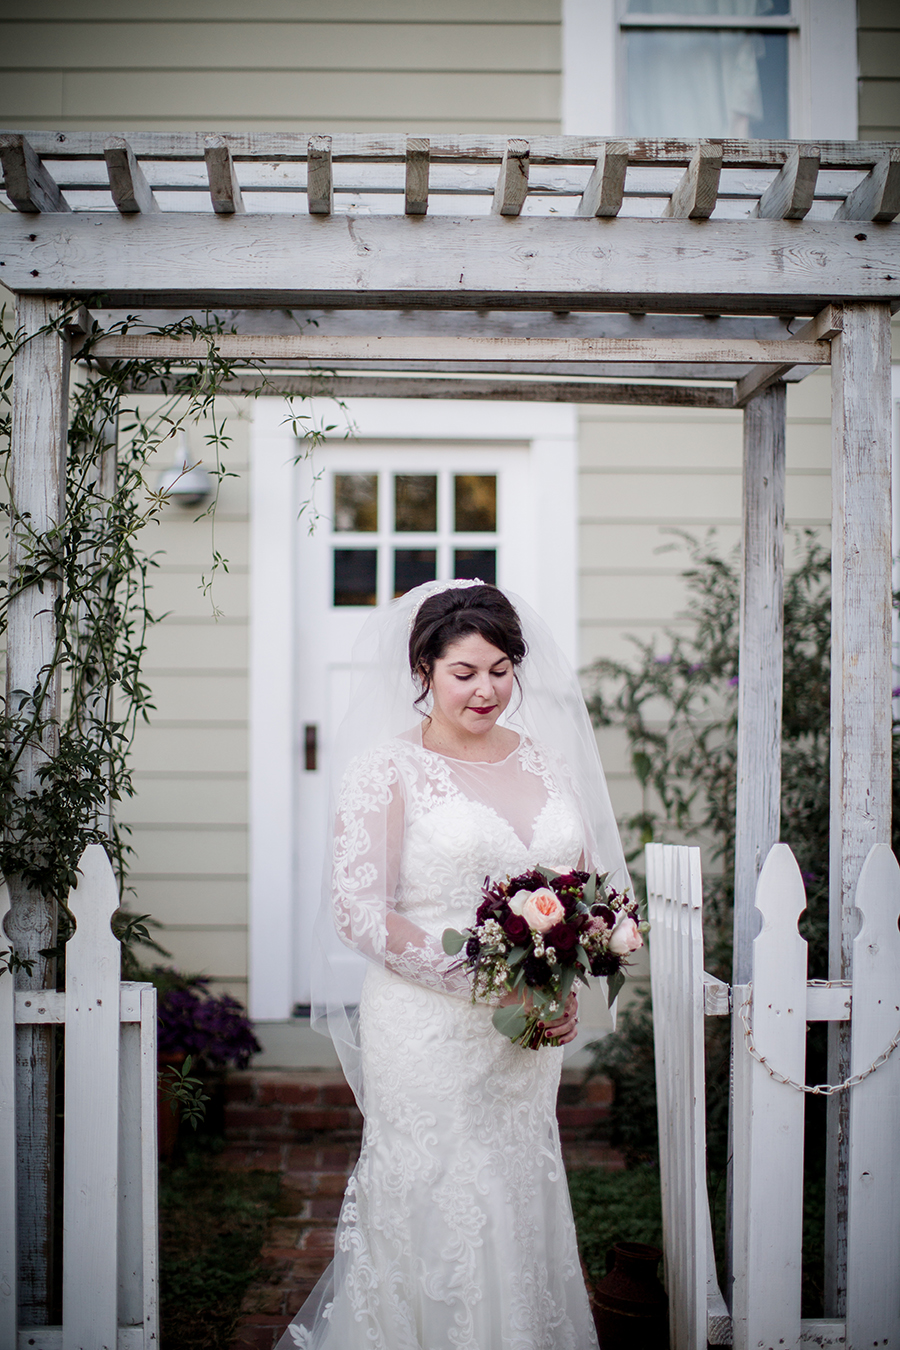 Looking down at her bouquet in between picket fence at this bridal session at The Barn at High Point Farms by Knoxville Wedding Photographer, Amanda May Photos.